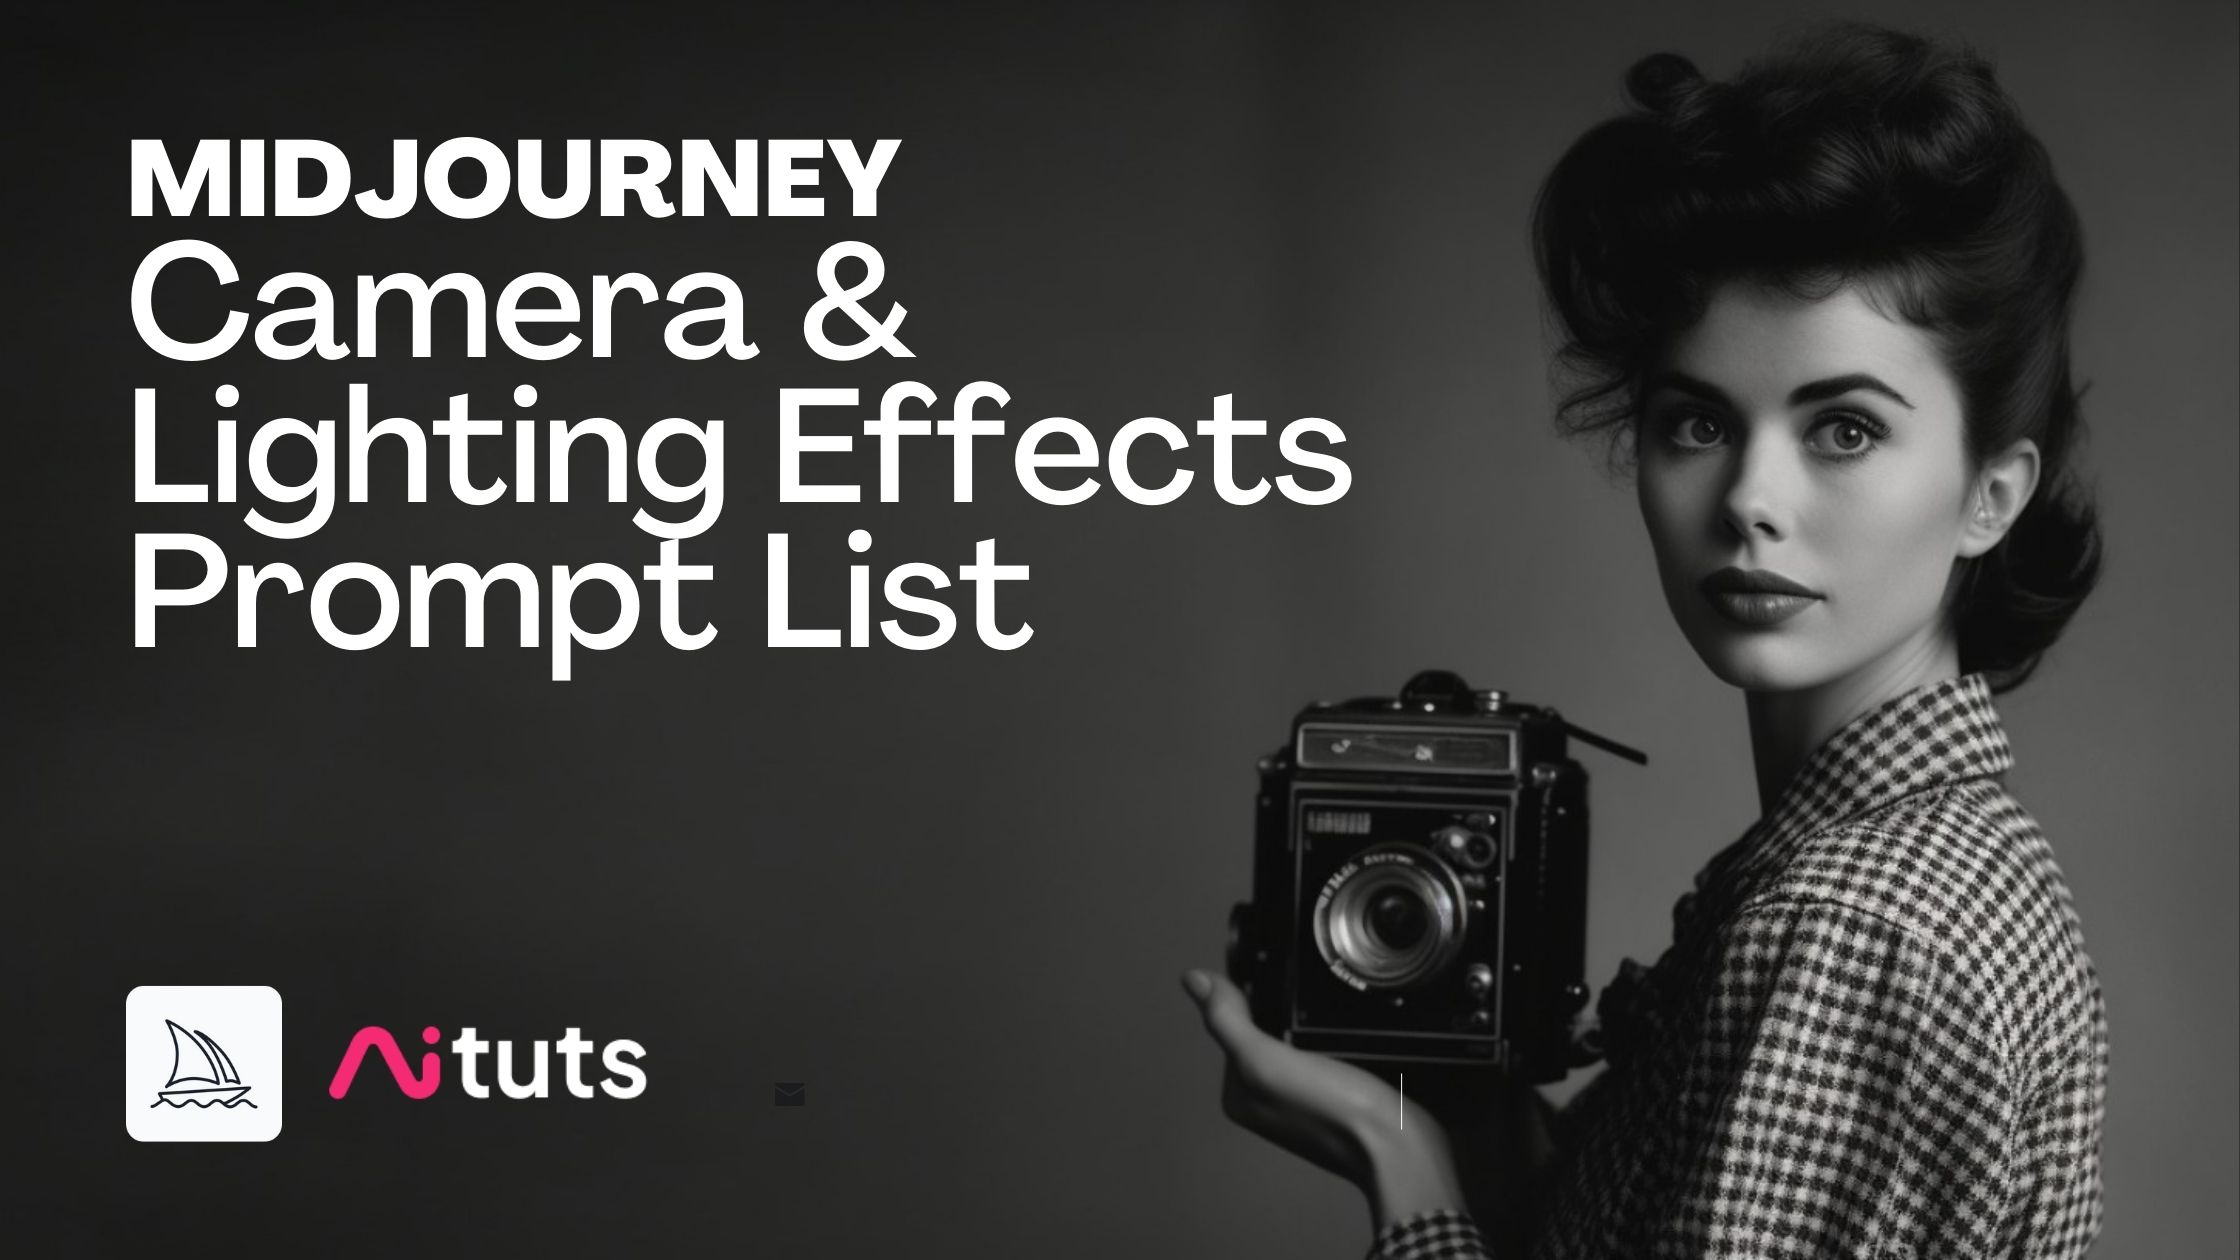 Midjourney Camera and Lighting Effects Prompt List Thumbnail